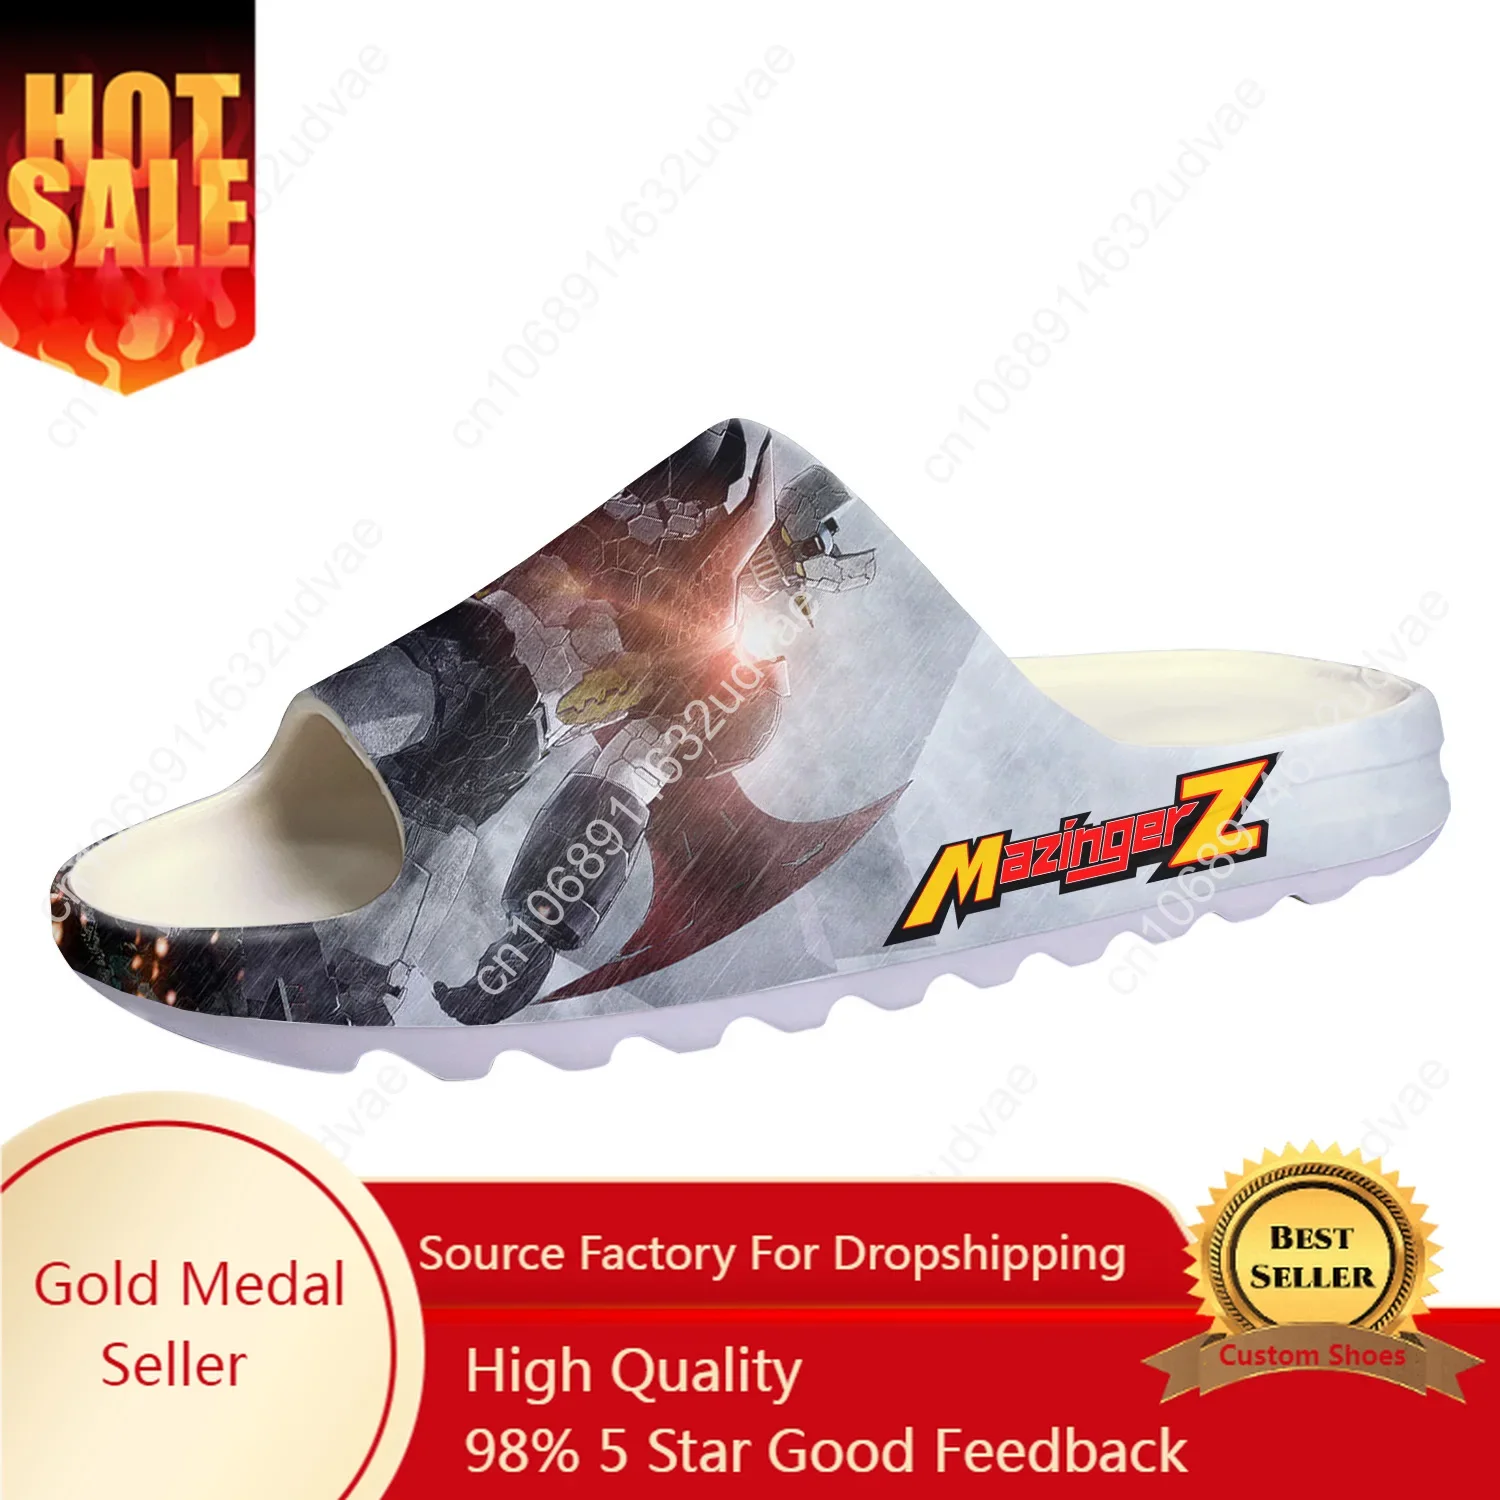 

Mazinger Z Cartoon Manga Anime Soft Sole Sllipers Home Clogs Customized Step On Water Shoes Mens Womens Teenager Step in Sandals